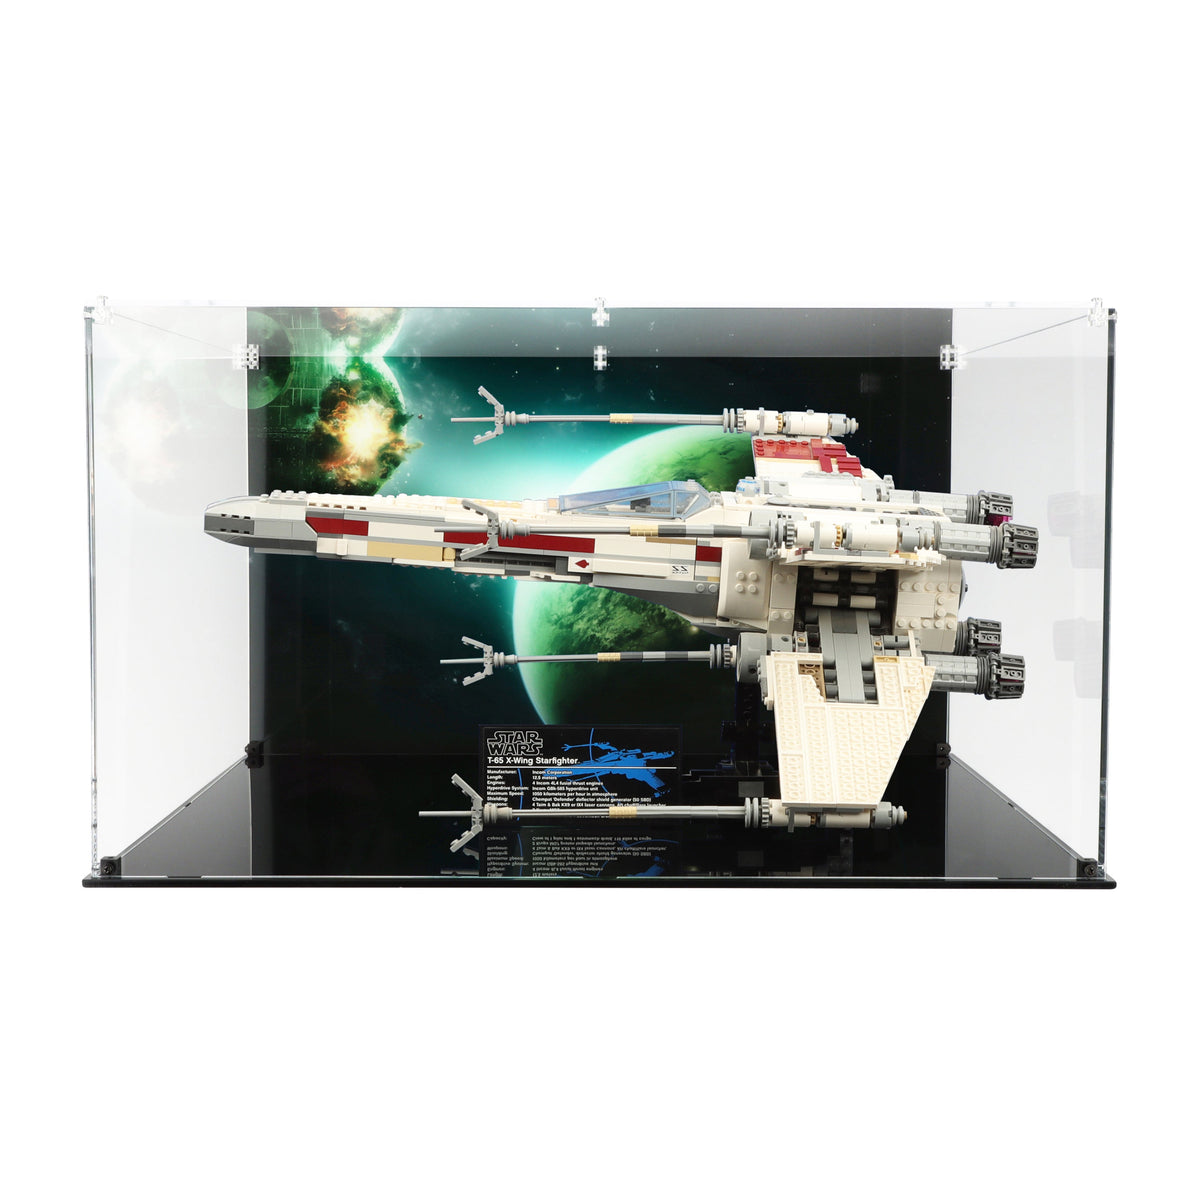 Lego Red Five X-wing Starfighter™ 10240 Display Case